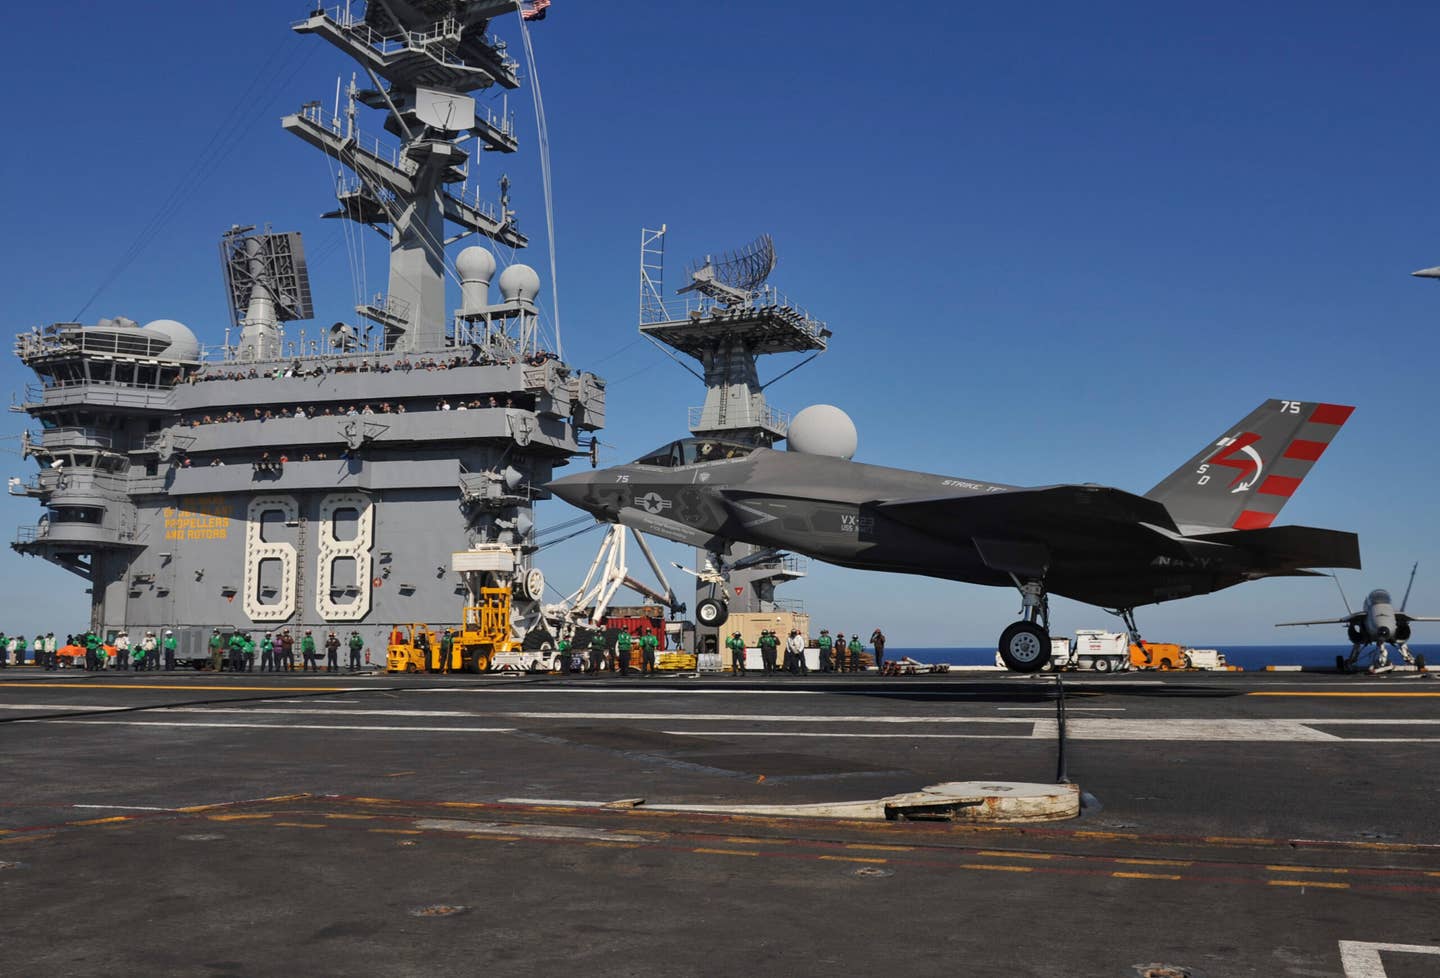 An F-35C Lightning II carrier variant Joint Strike Fighter conducts its first arrested landing aboard the aircraft carrier USS Nimitz (CVN 68). An angled flight deck is a staple of modern CATOBAR carriers and enables high sortie rates and key redundancy. (U.S. Navy photo by Mass Communication Specialist 3rd Class Kelly M. Agee/Released)